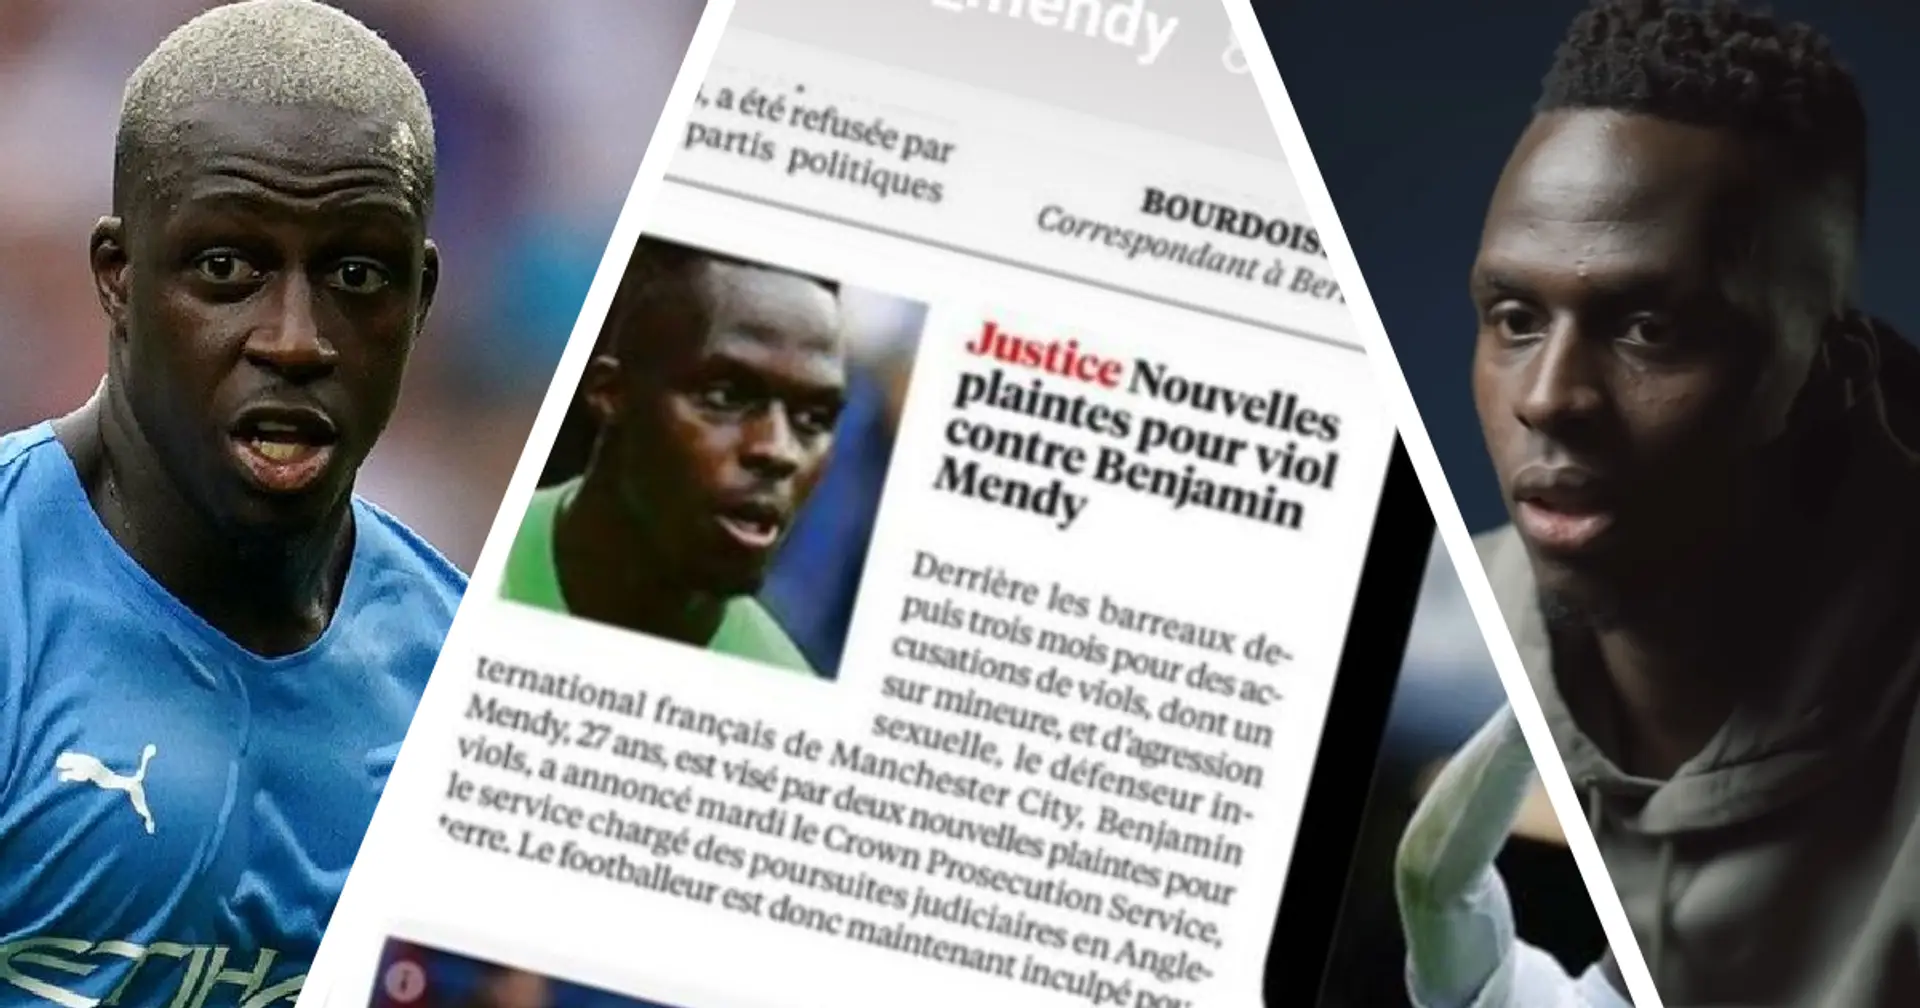 'Blacks have neither first names nor distinct faces': Edouard Mendy breaks silence on his photo in Benjamin Mendy rape case 